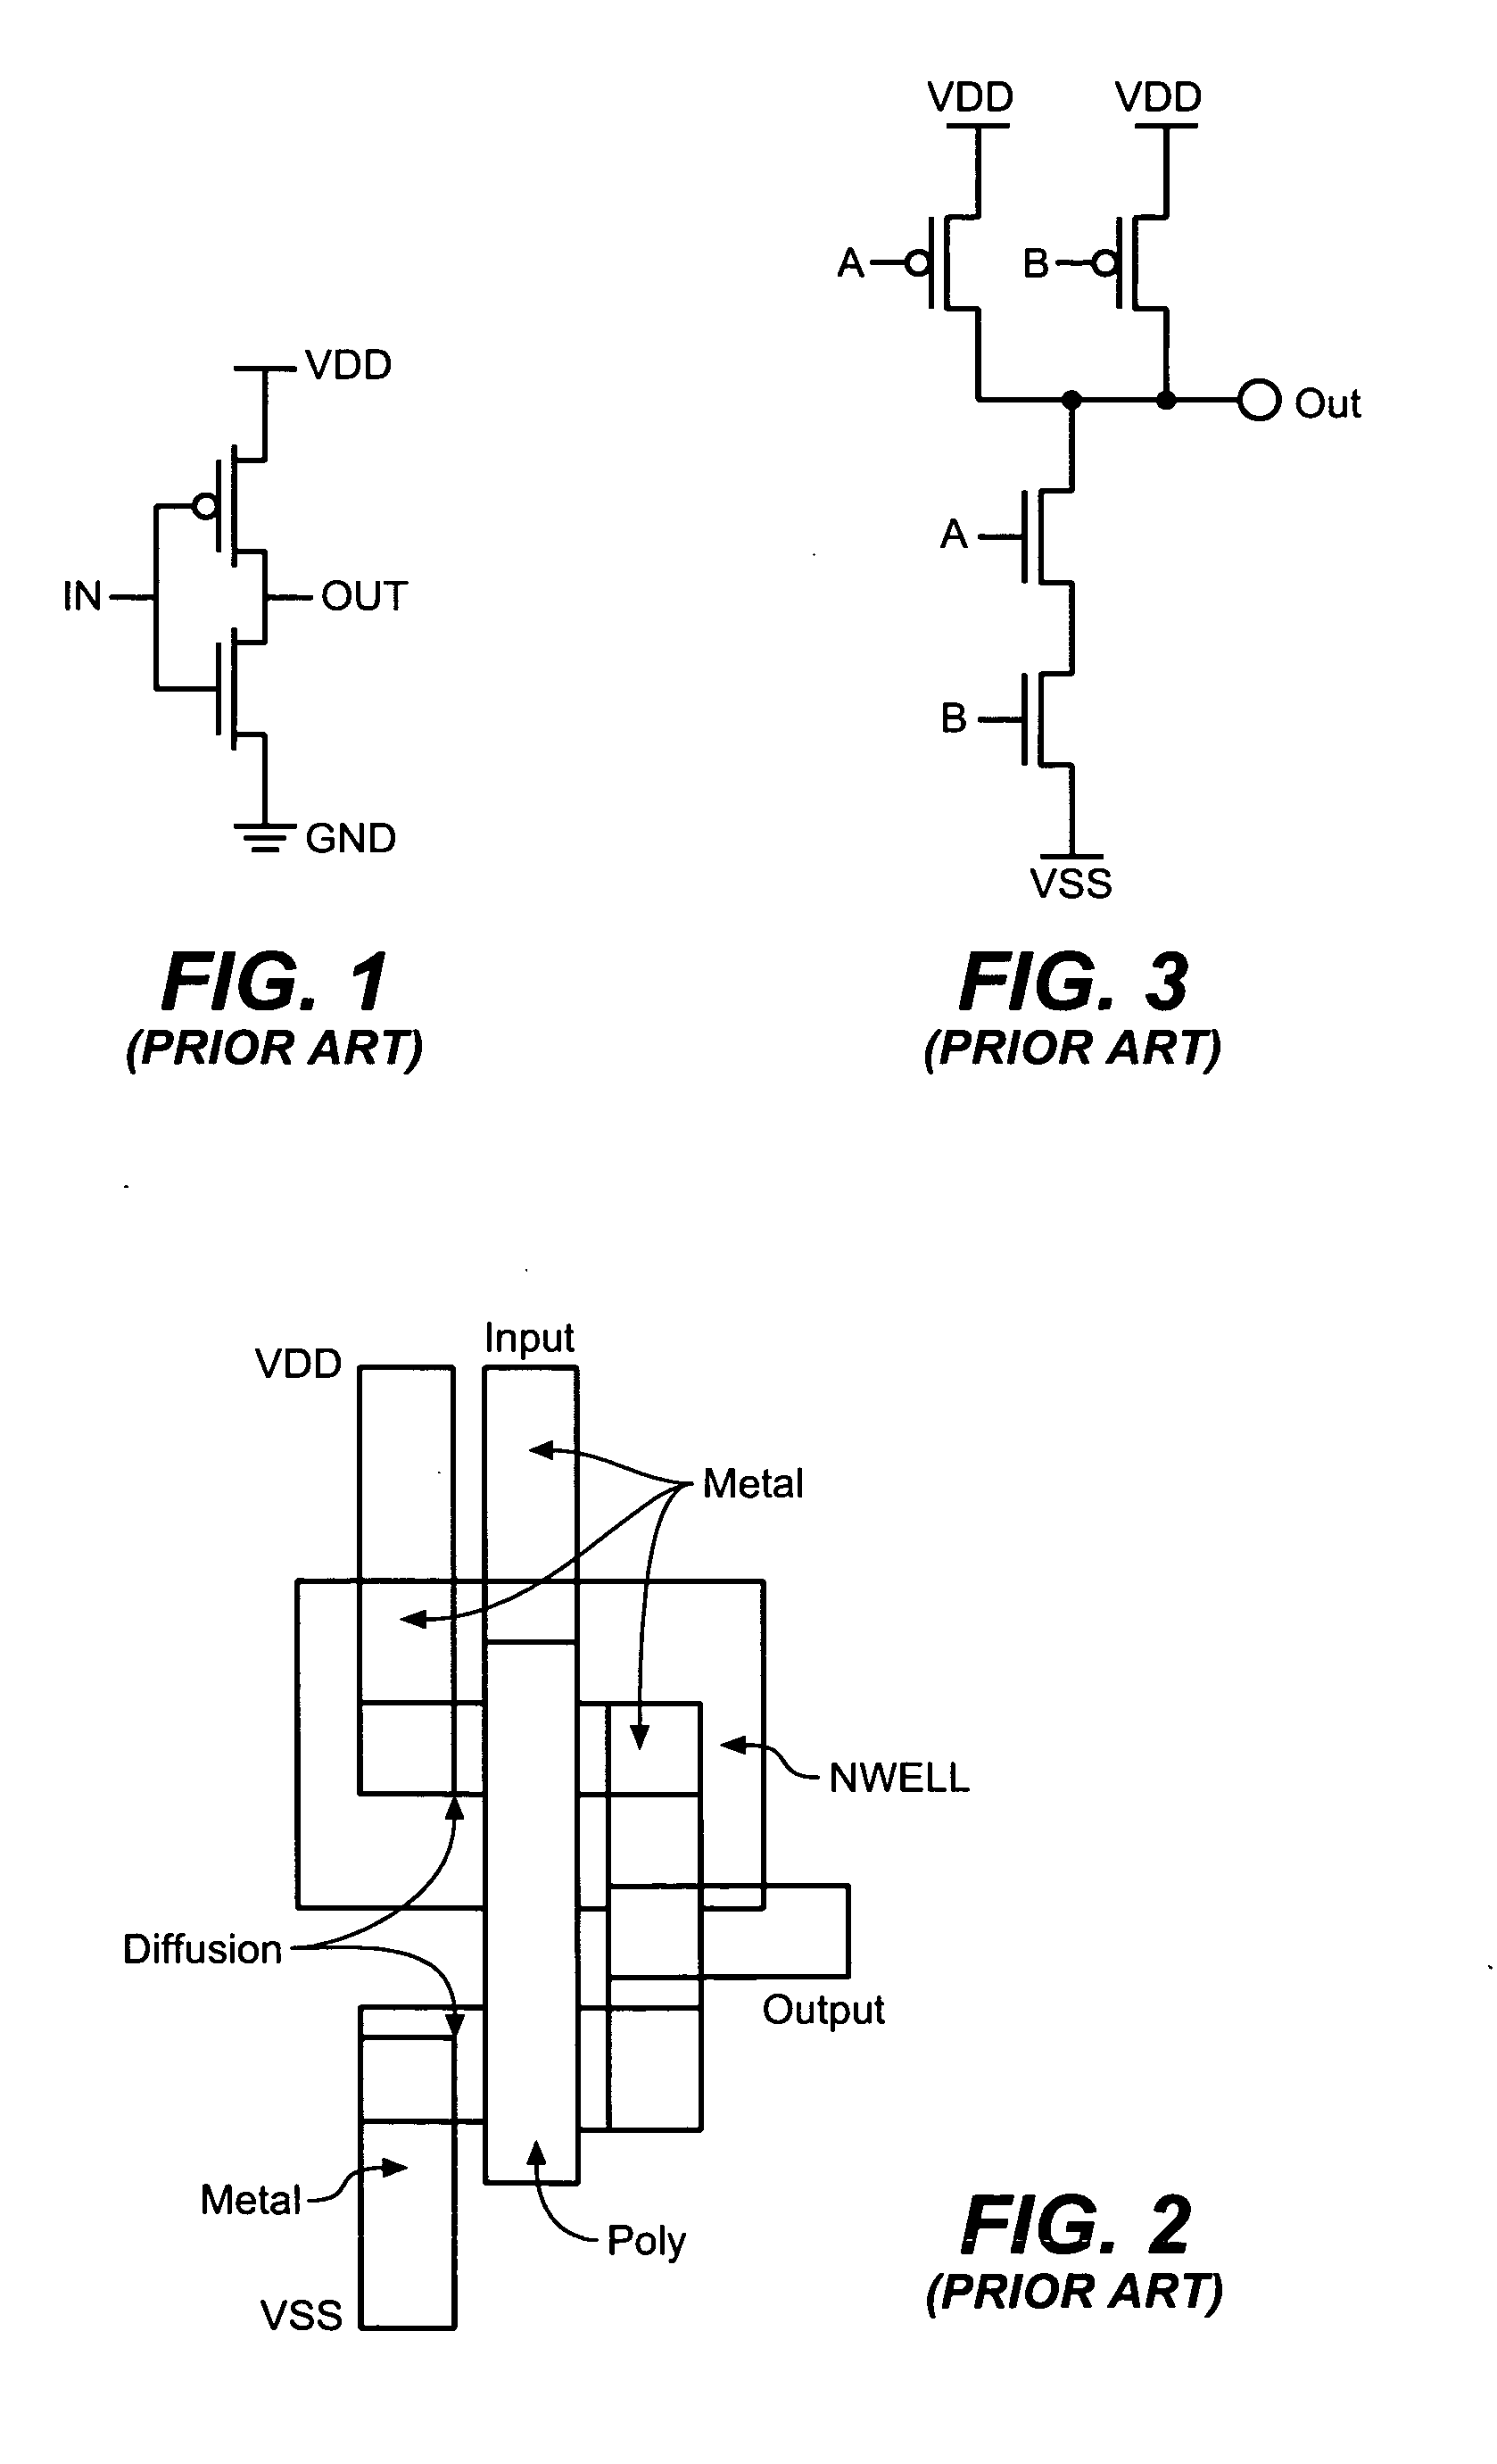 Asymmetrical layout for complementary metal-oxide-semiconductor integrated circuit to reduce power consumption